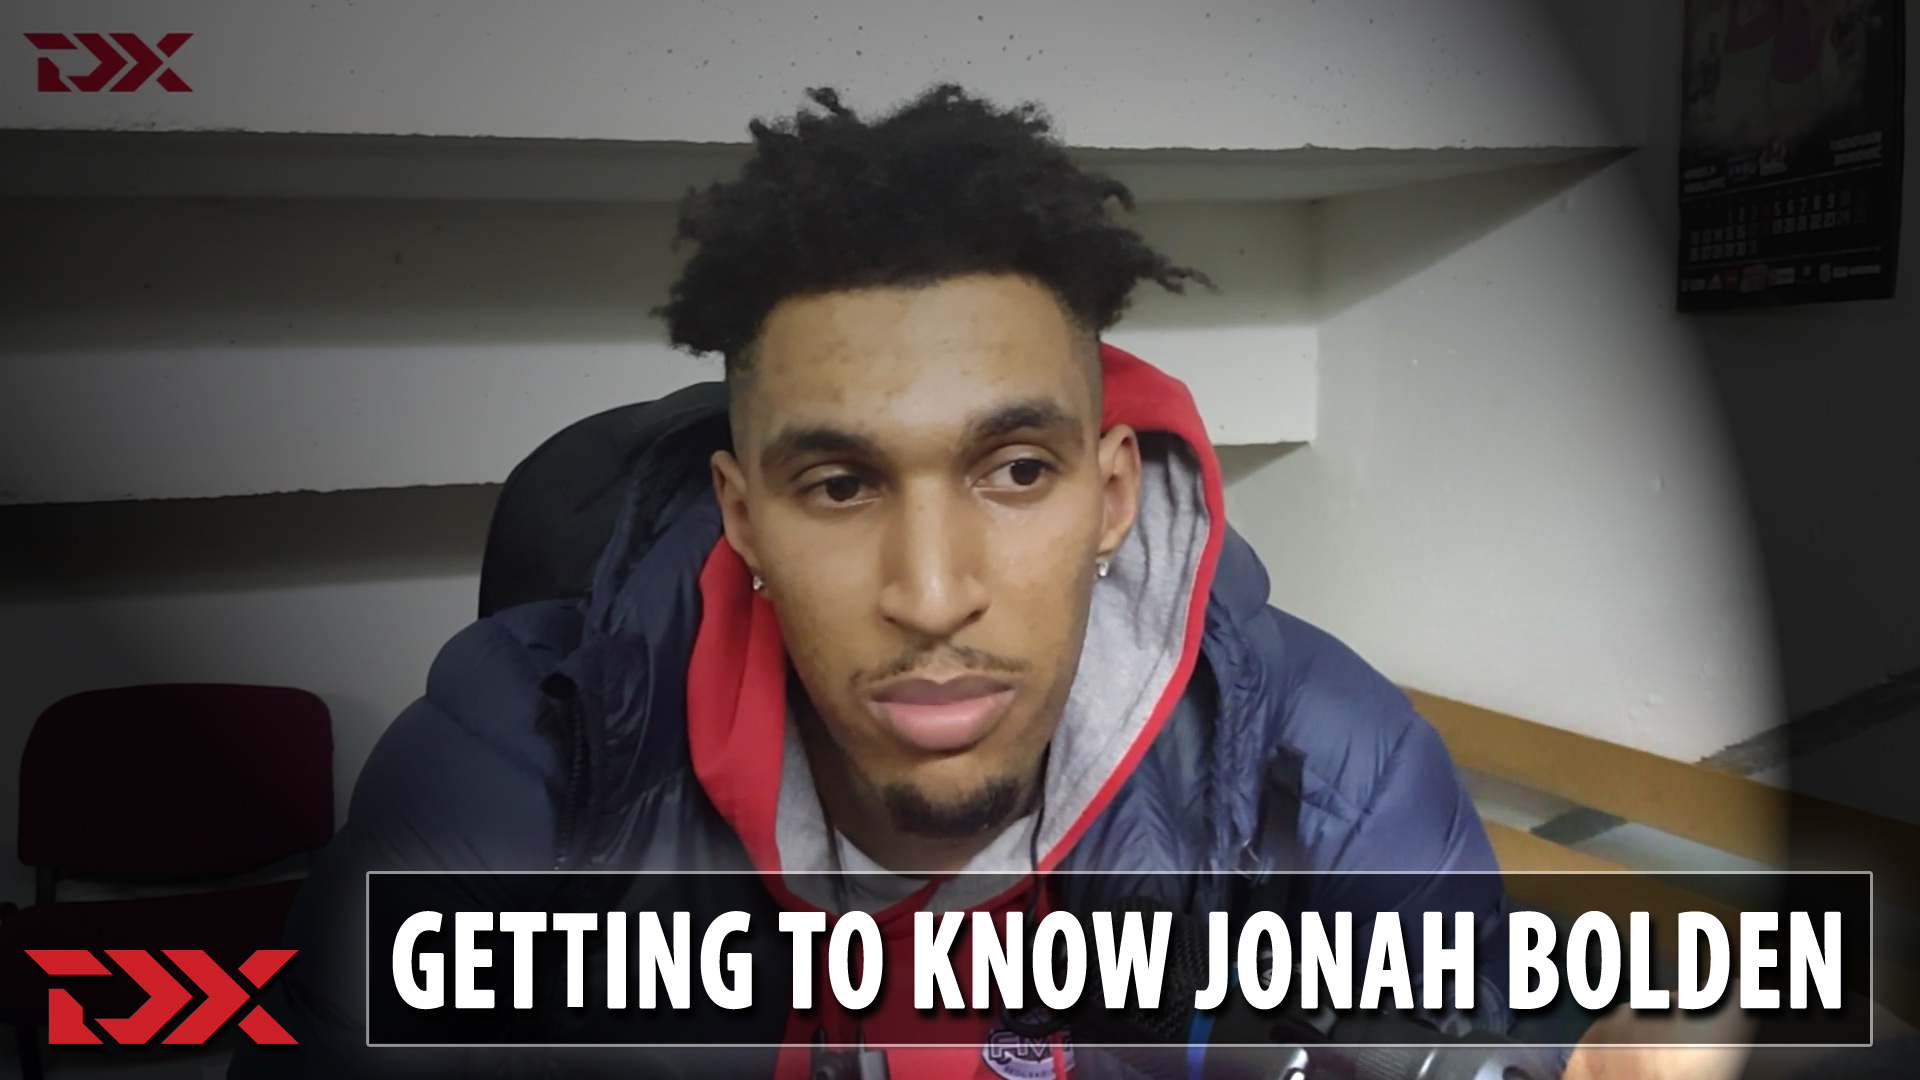 Getting to Know: Jonah Bolden